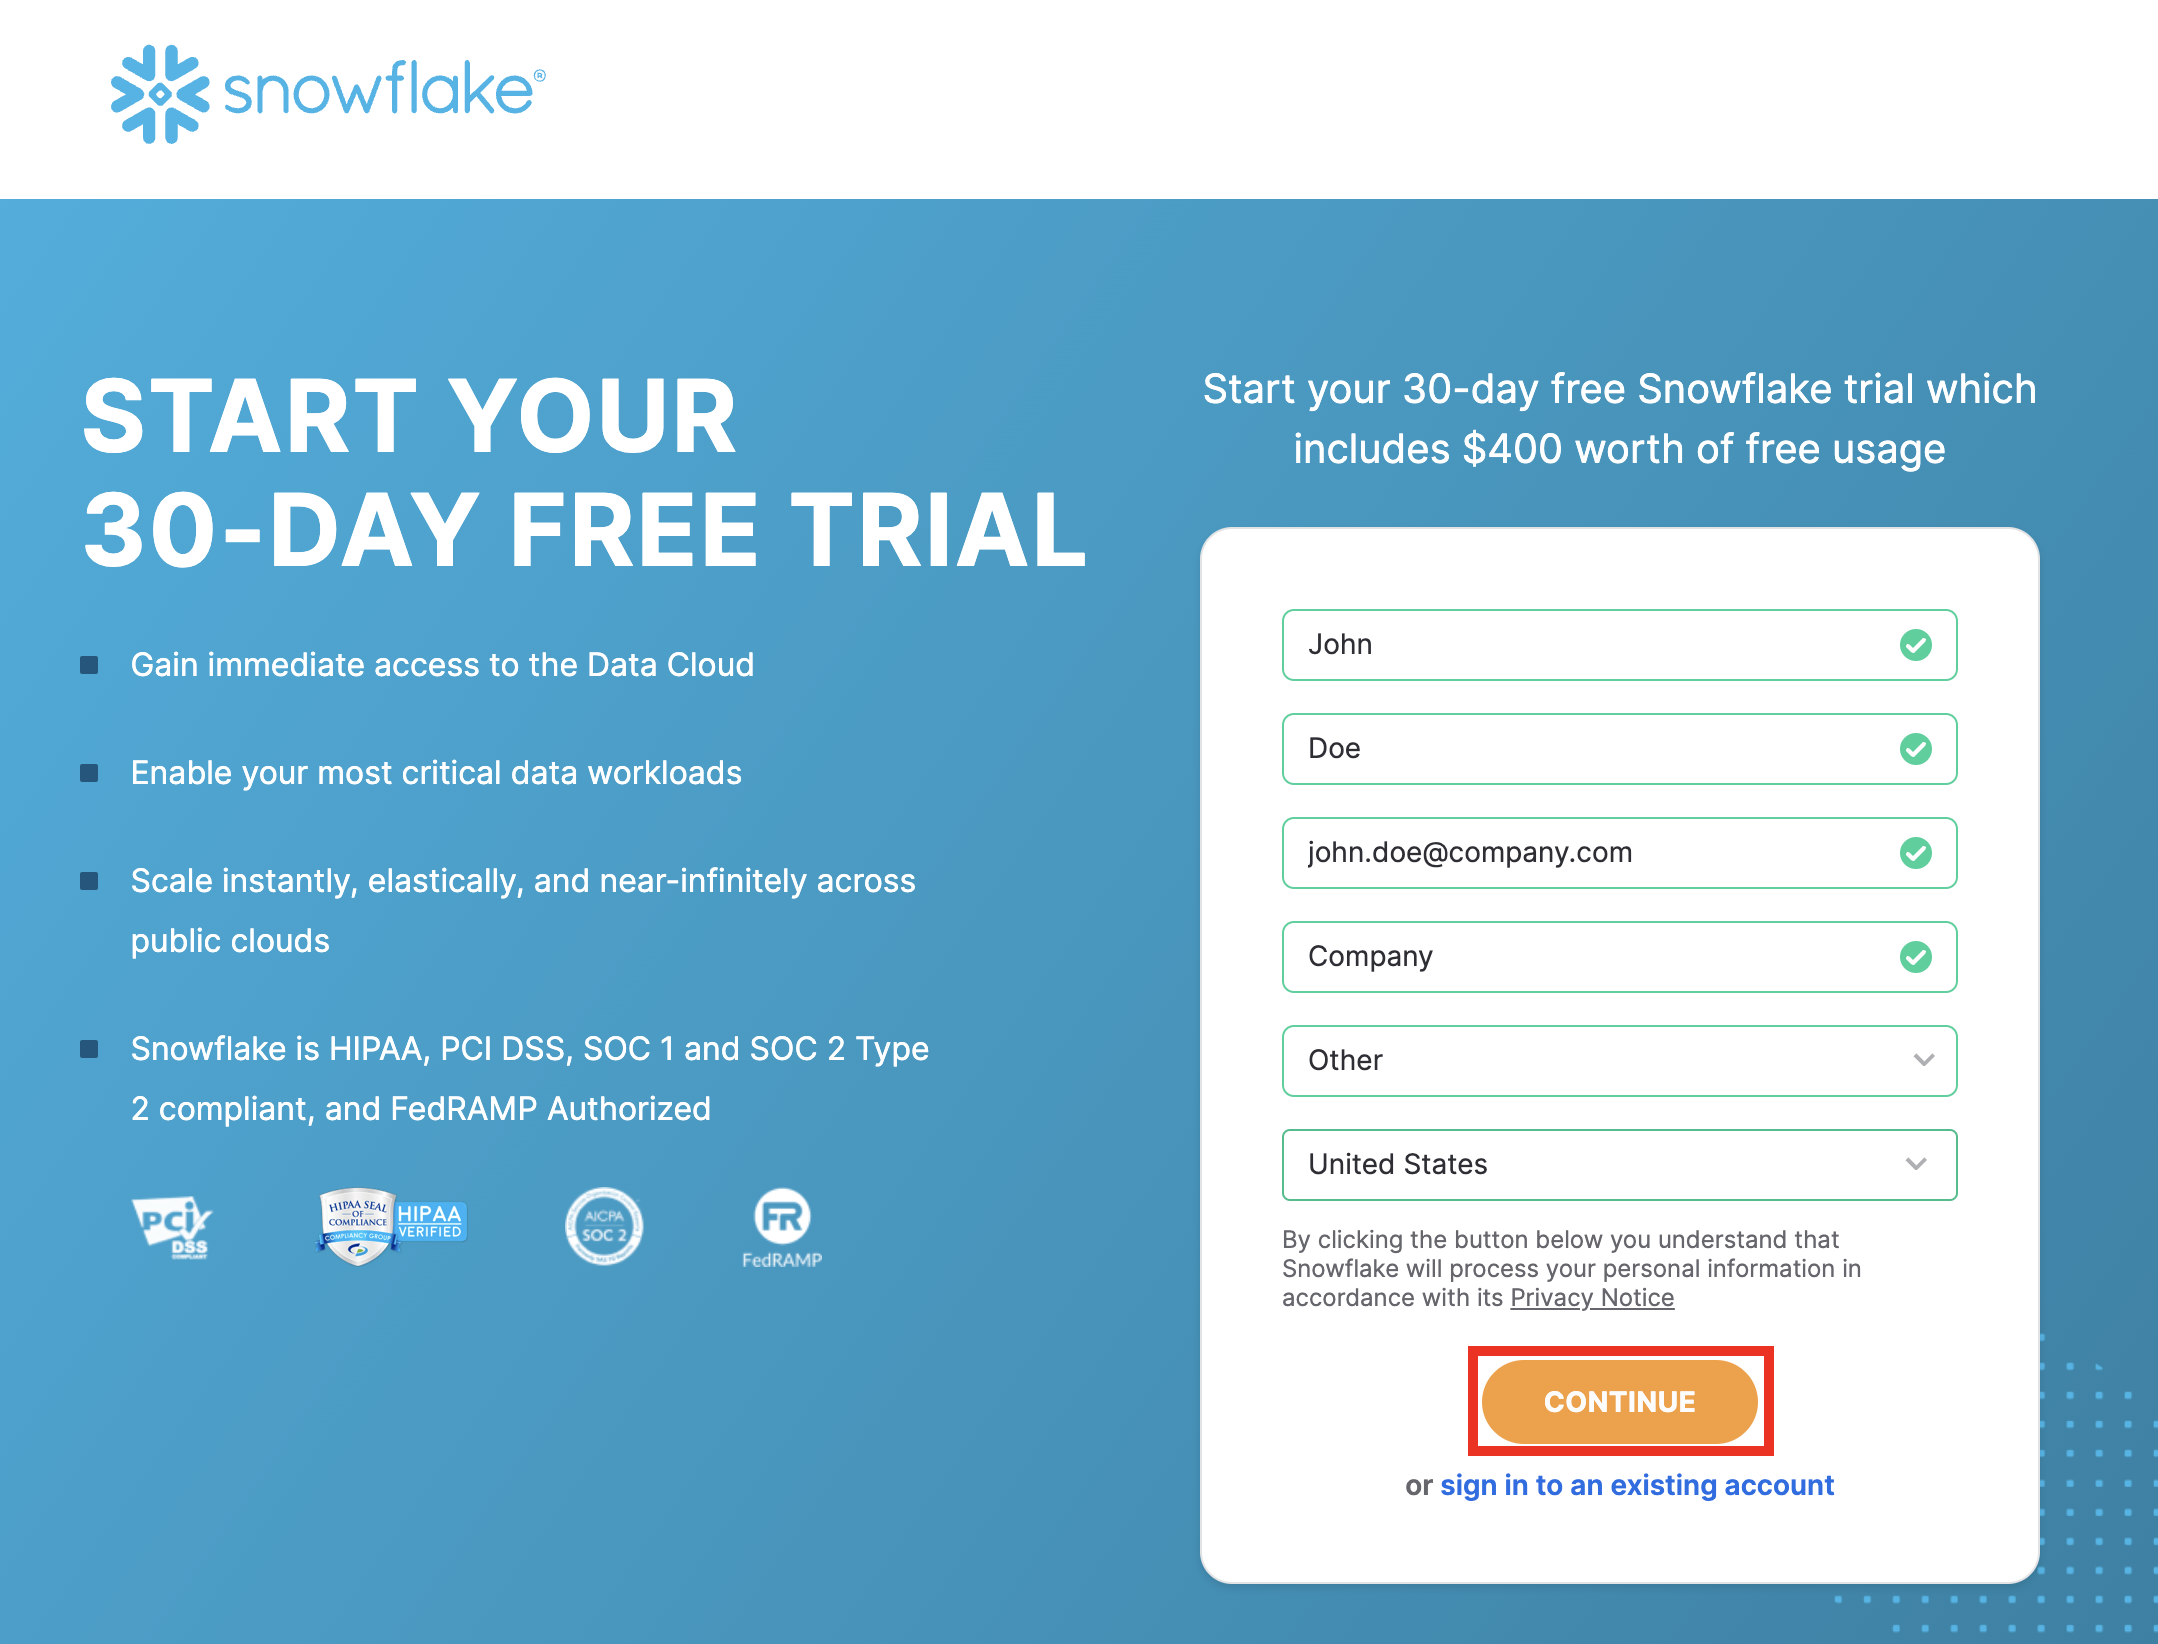 Enter user credentials for Snowflake trial account